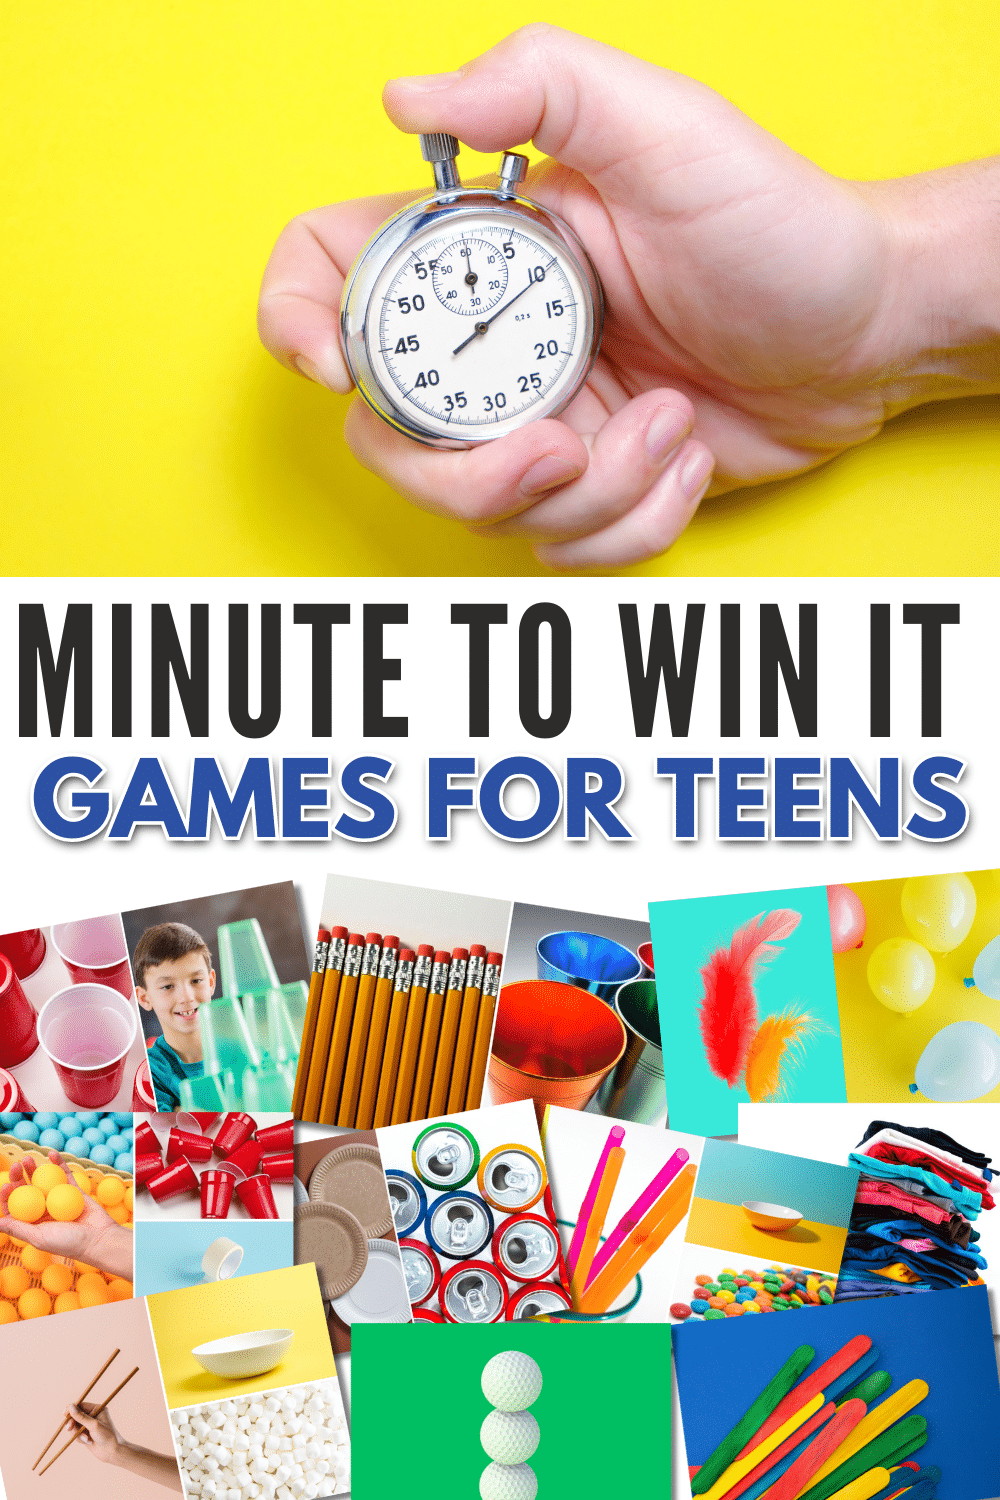 Pictures of various minute to win it games with text title "Minute to win it games for teens".